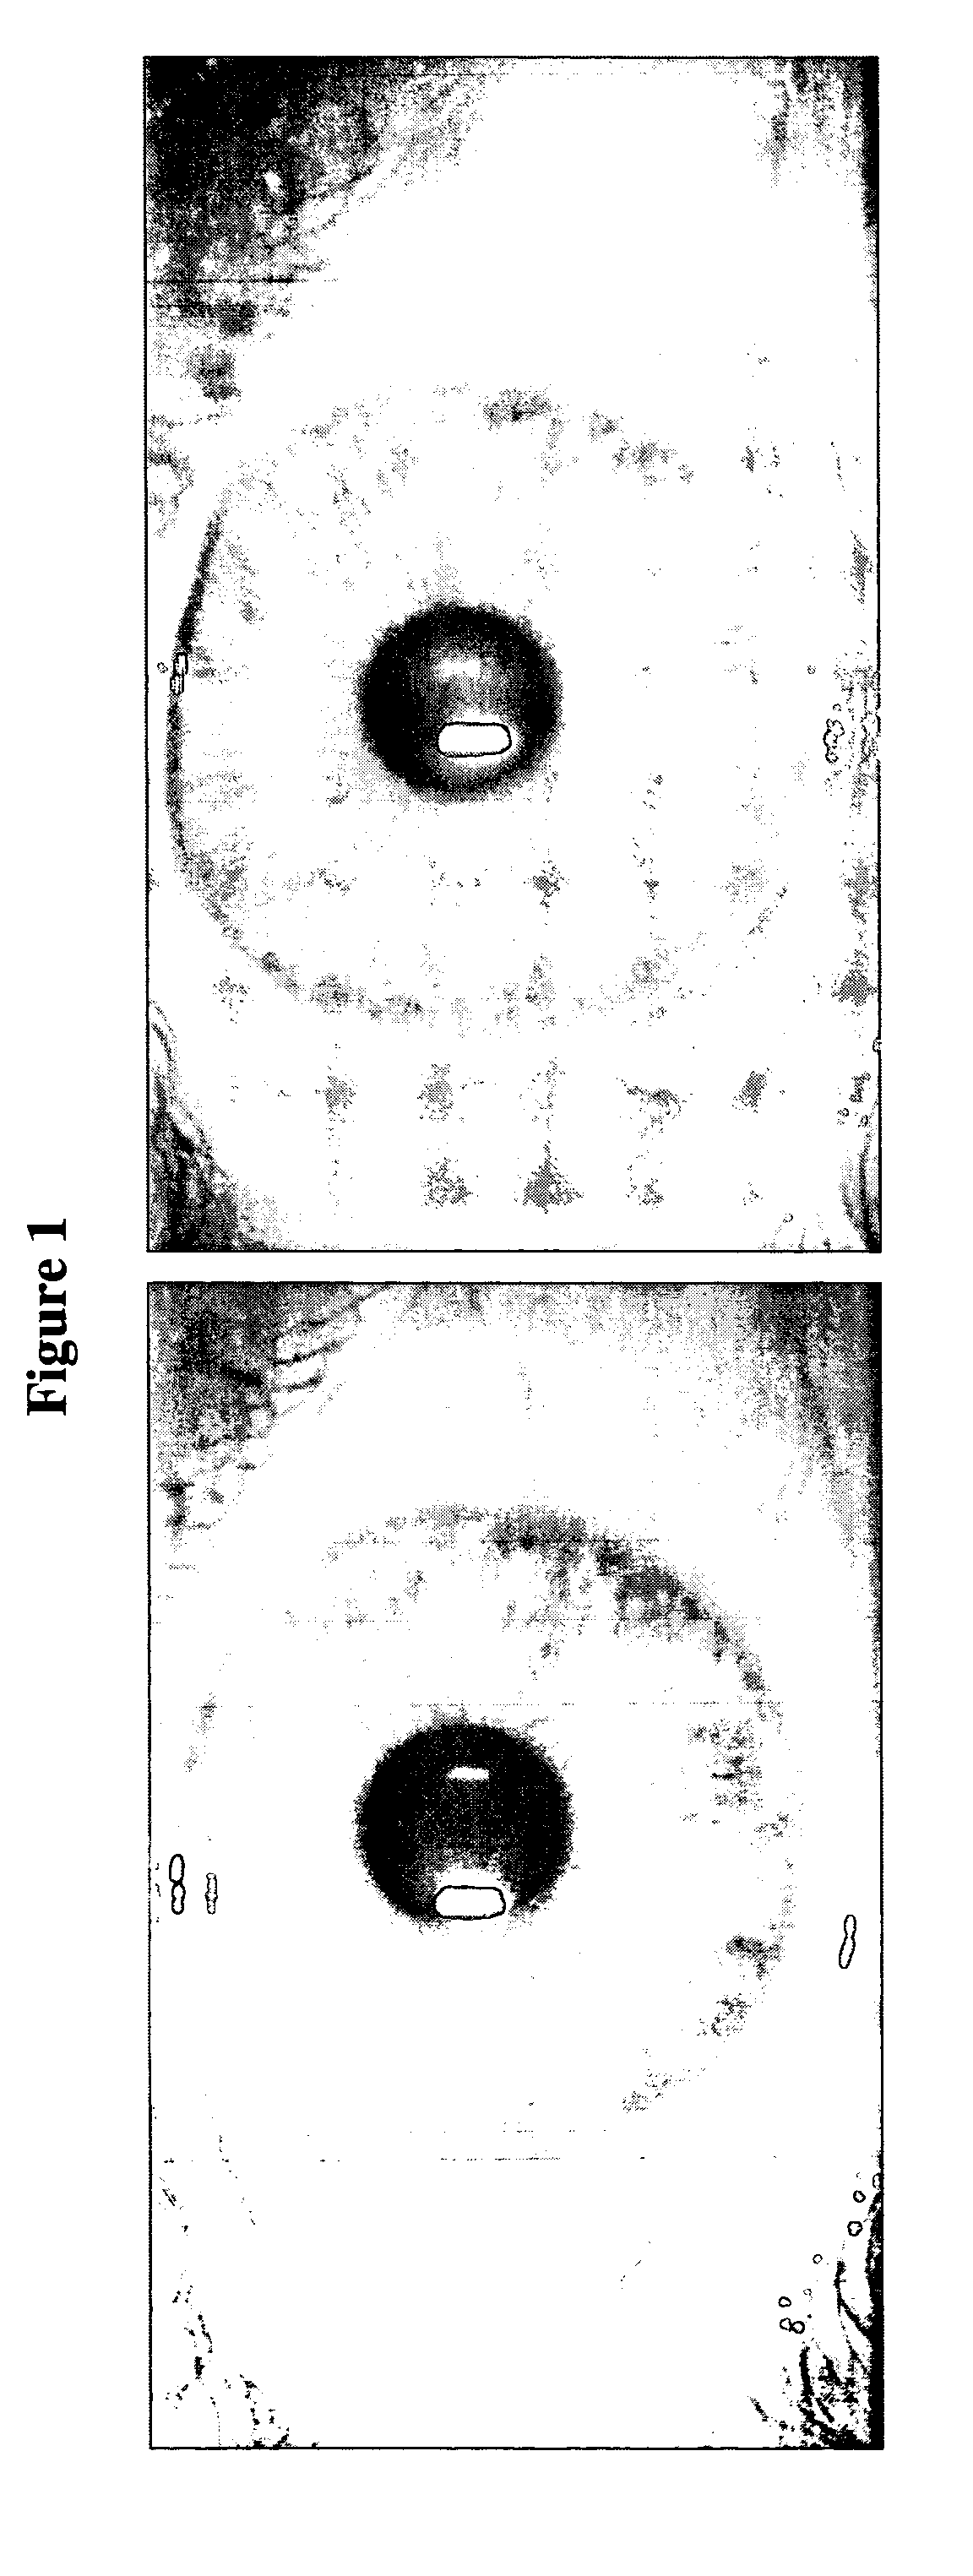 Soft contact lenses displaying superior on-eye comfort